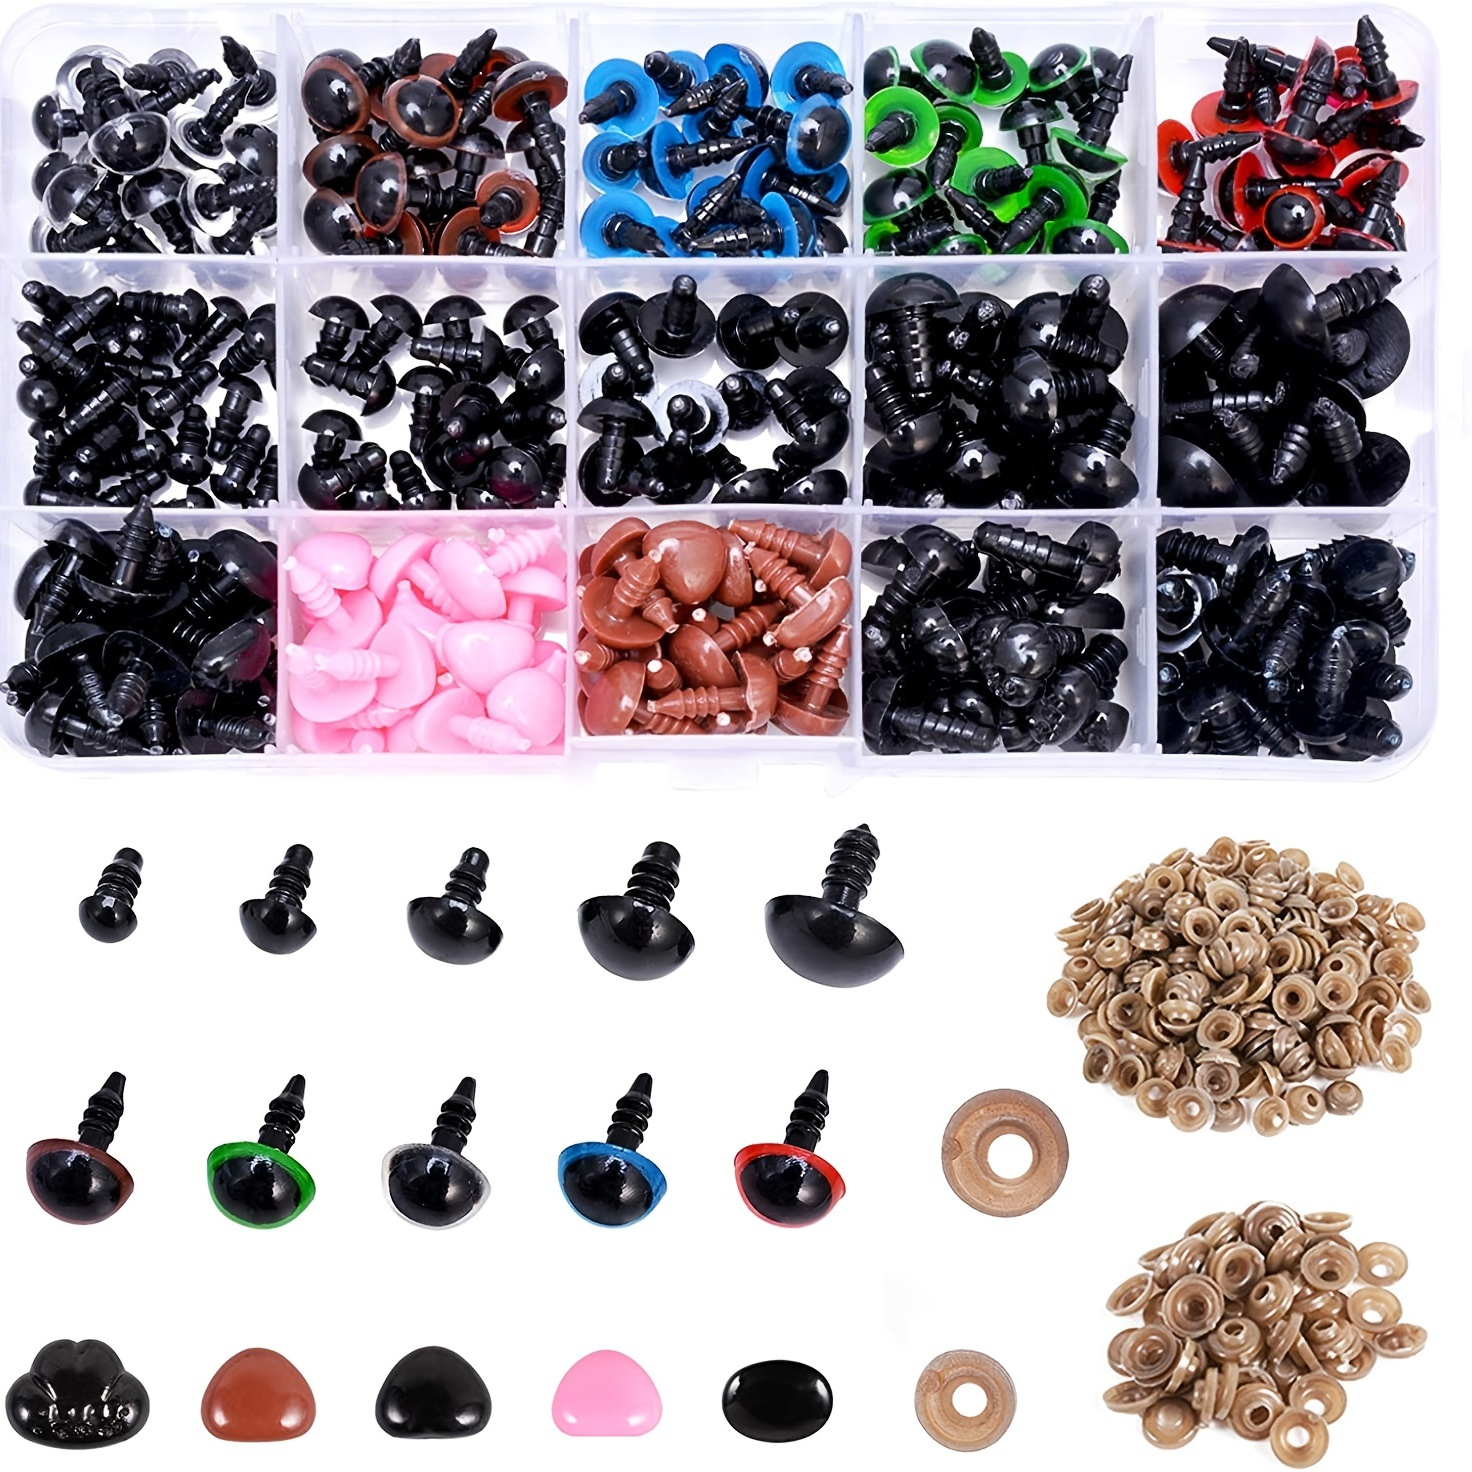 180pcs/Set Large Safety Eyes And Noses For Amigurumi, 16-30mm Plastic Black  Eyes With Washers For Crochet Animals, Puppet, Stuffed Animal And Teddy Be